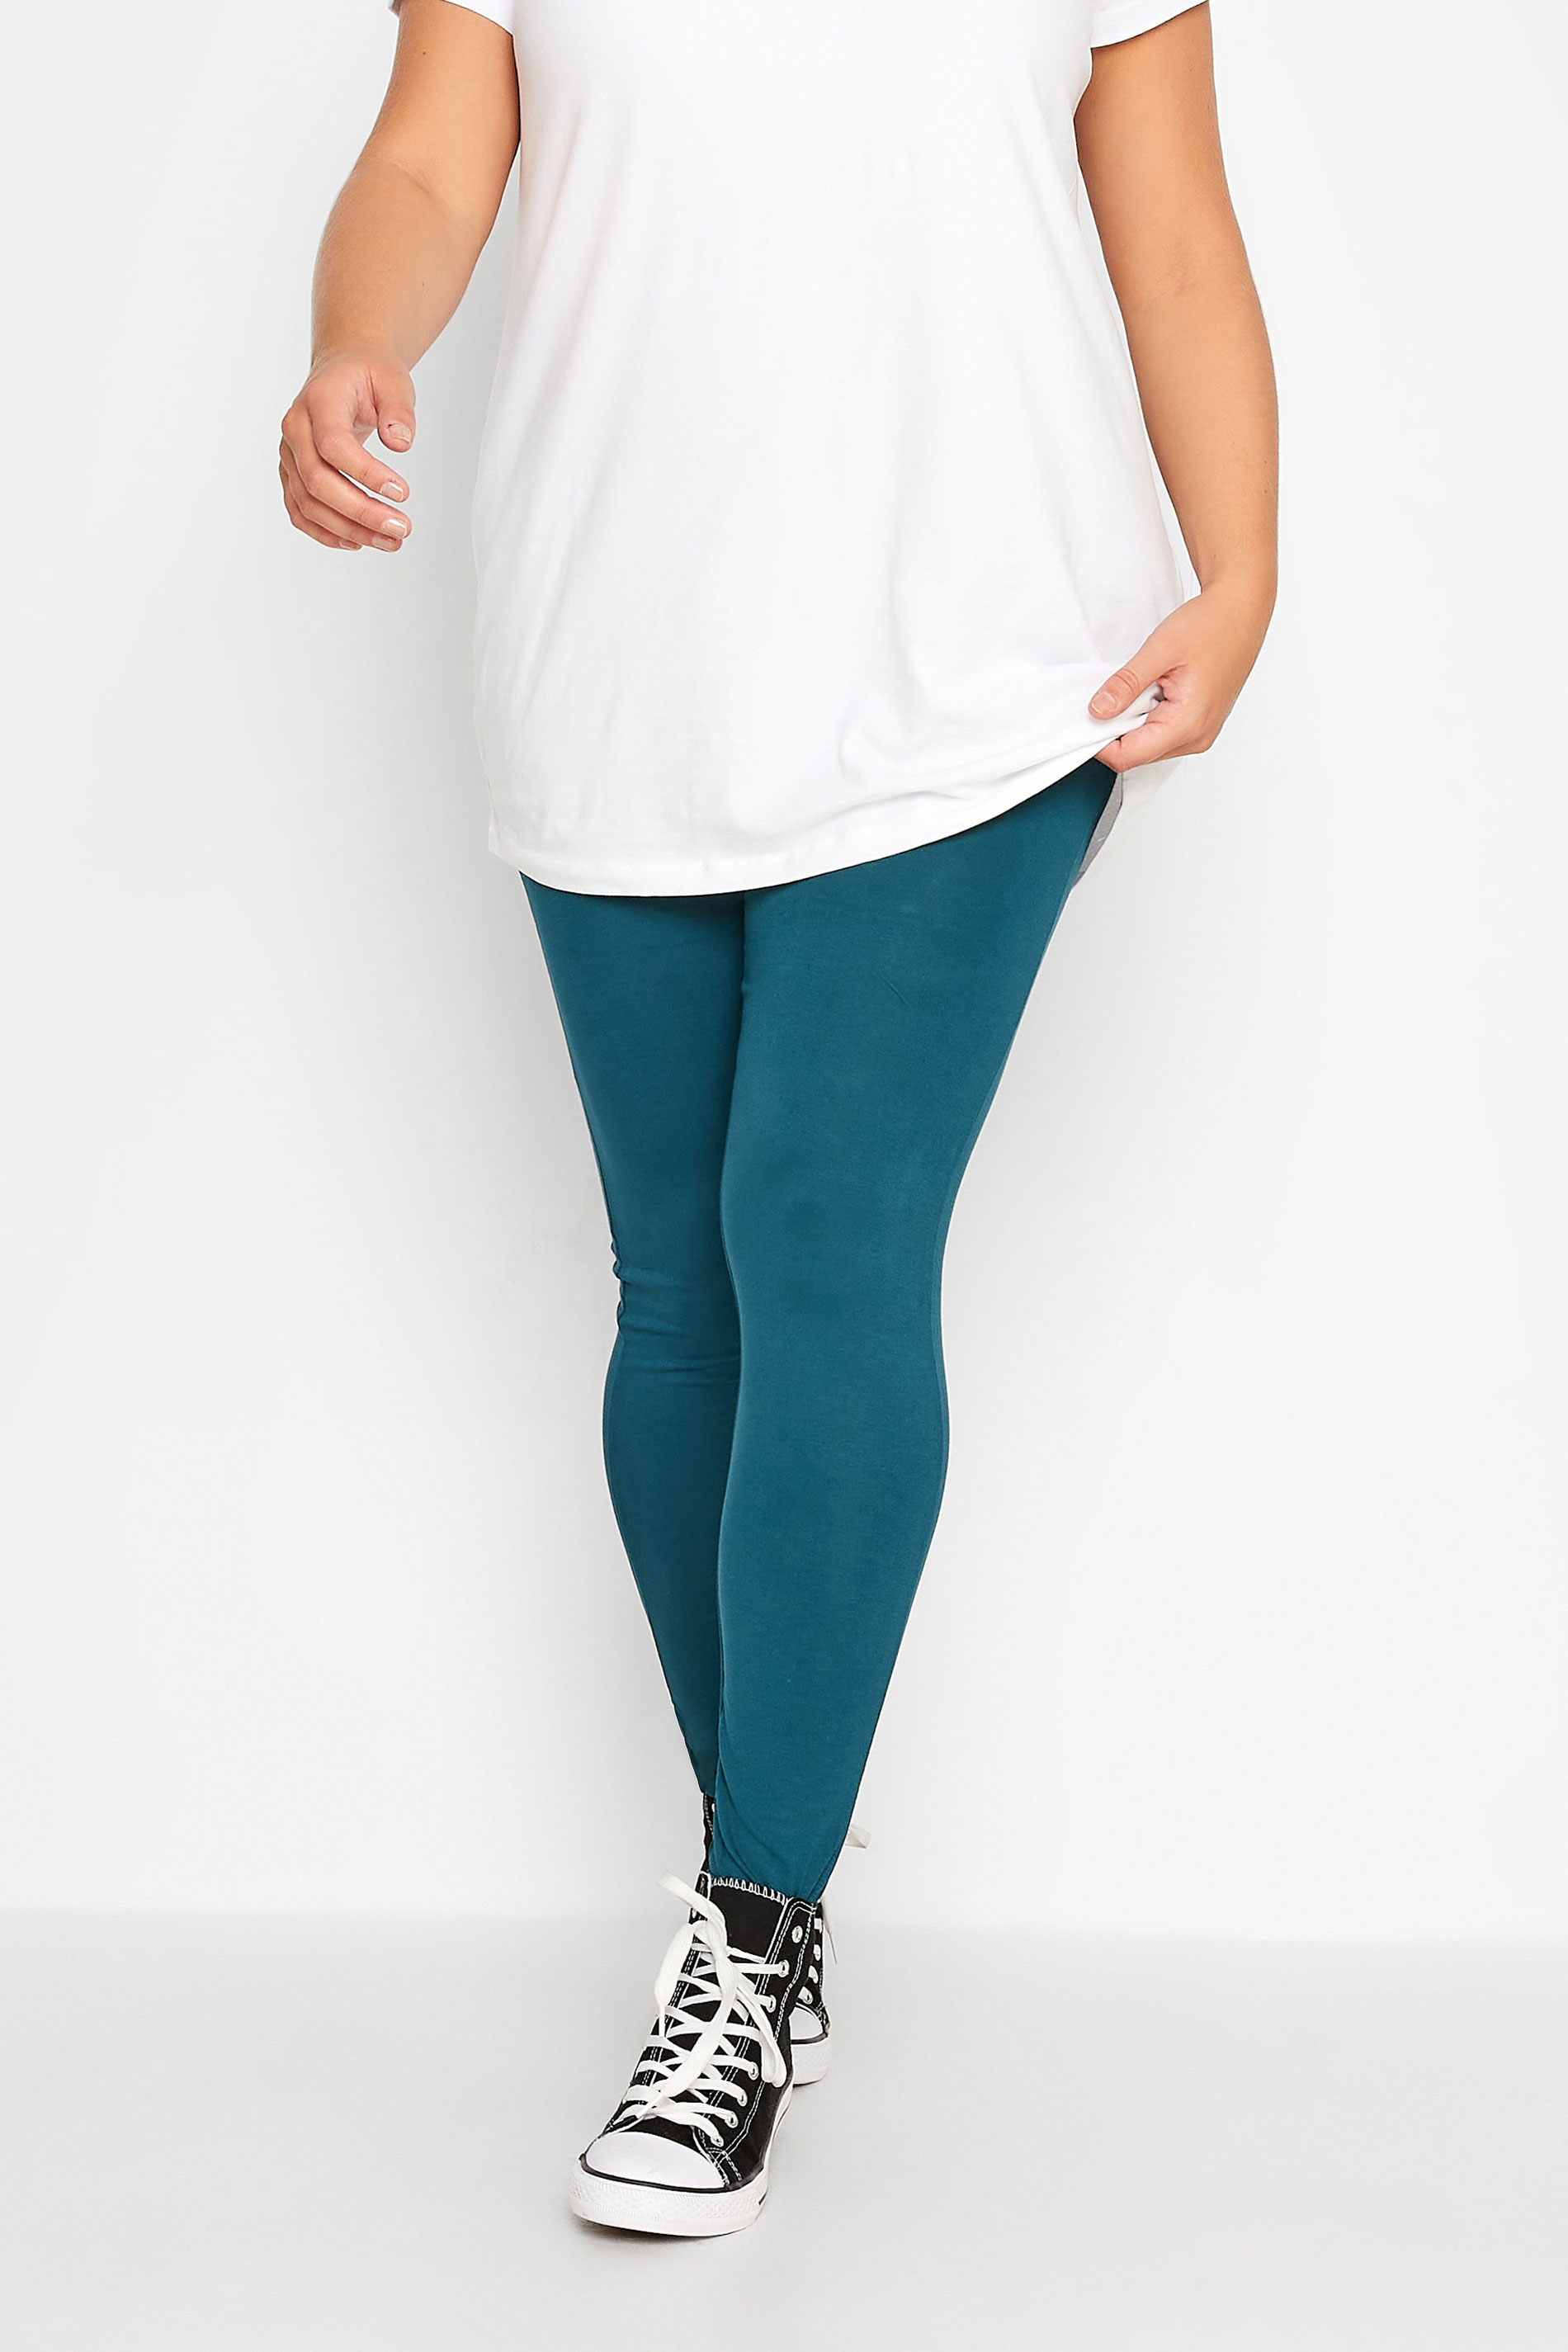 Plus Size Teal Blue Leggings | Yours Clothing 1